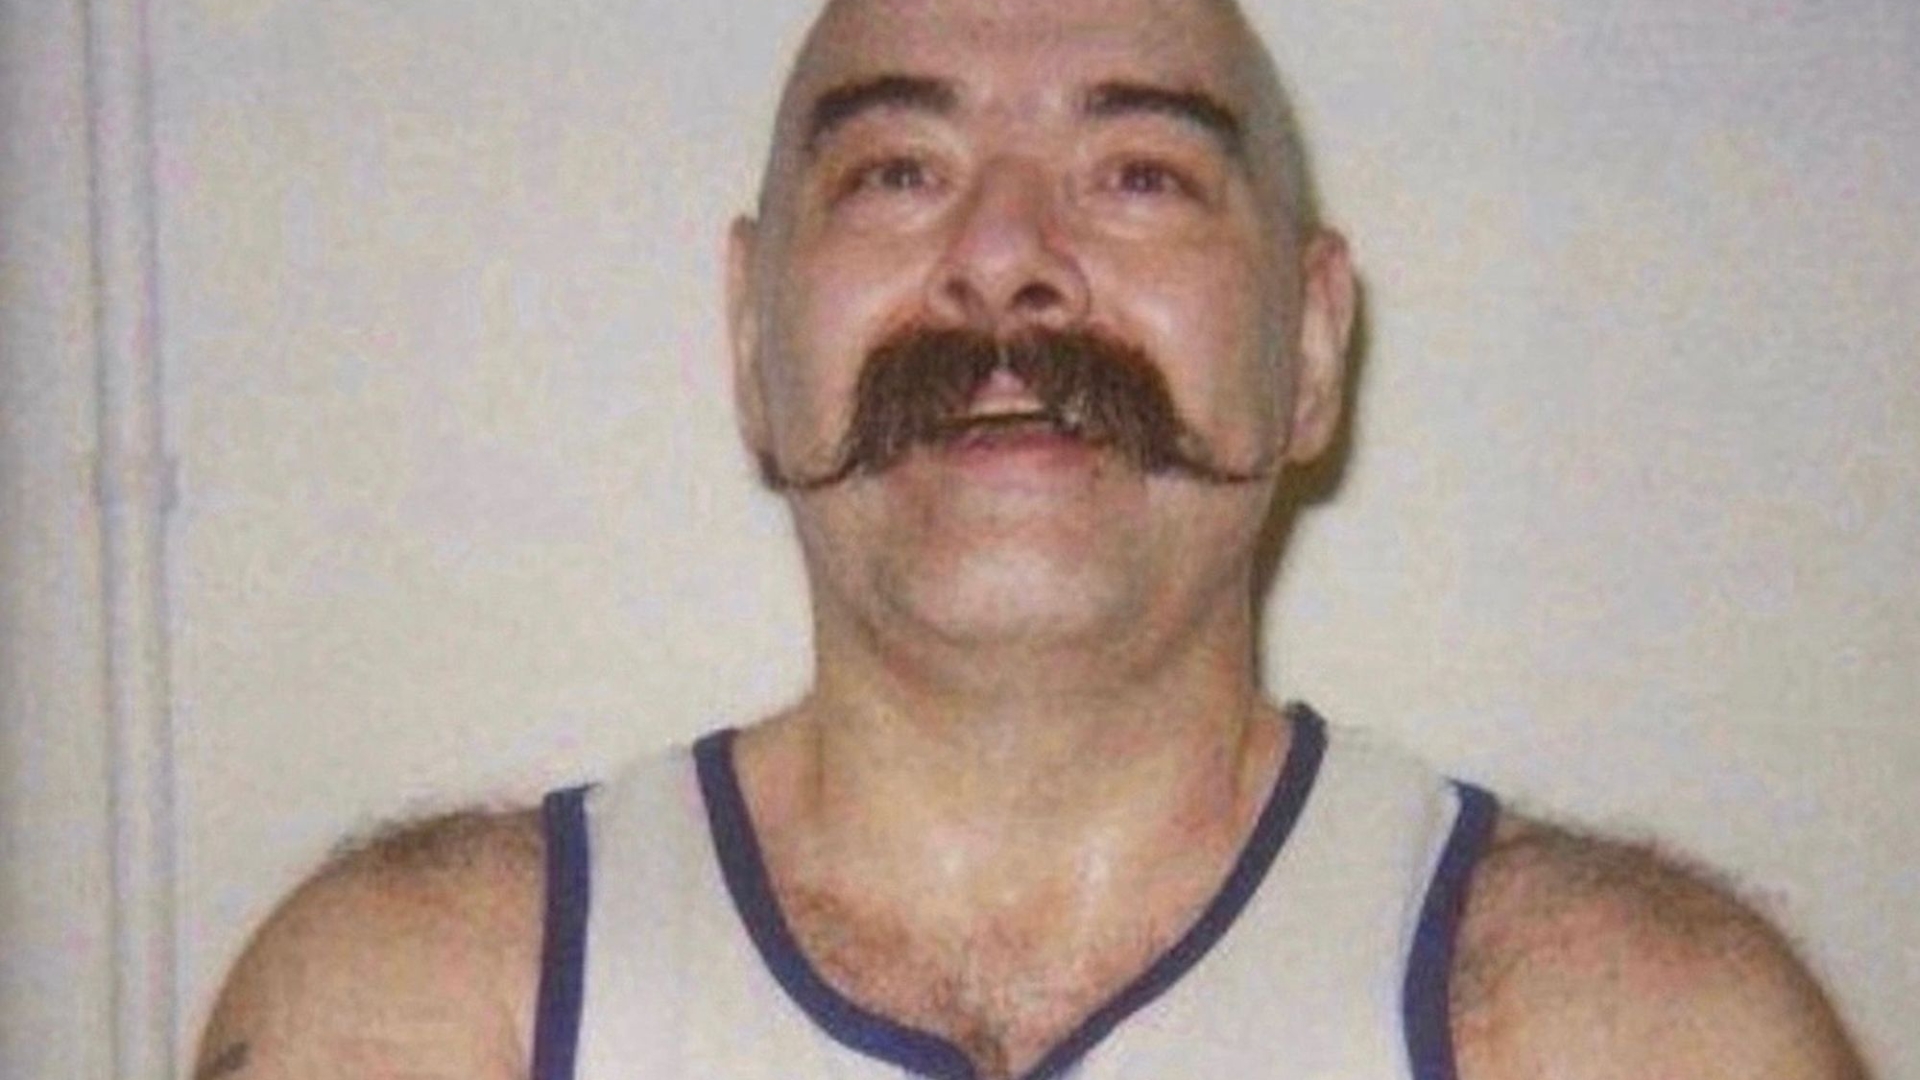 Charles Bronson, who was denied parole, breaks into SONG before calling his mom